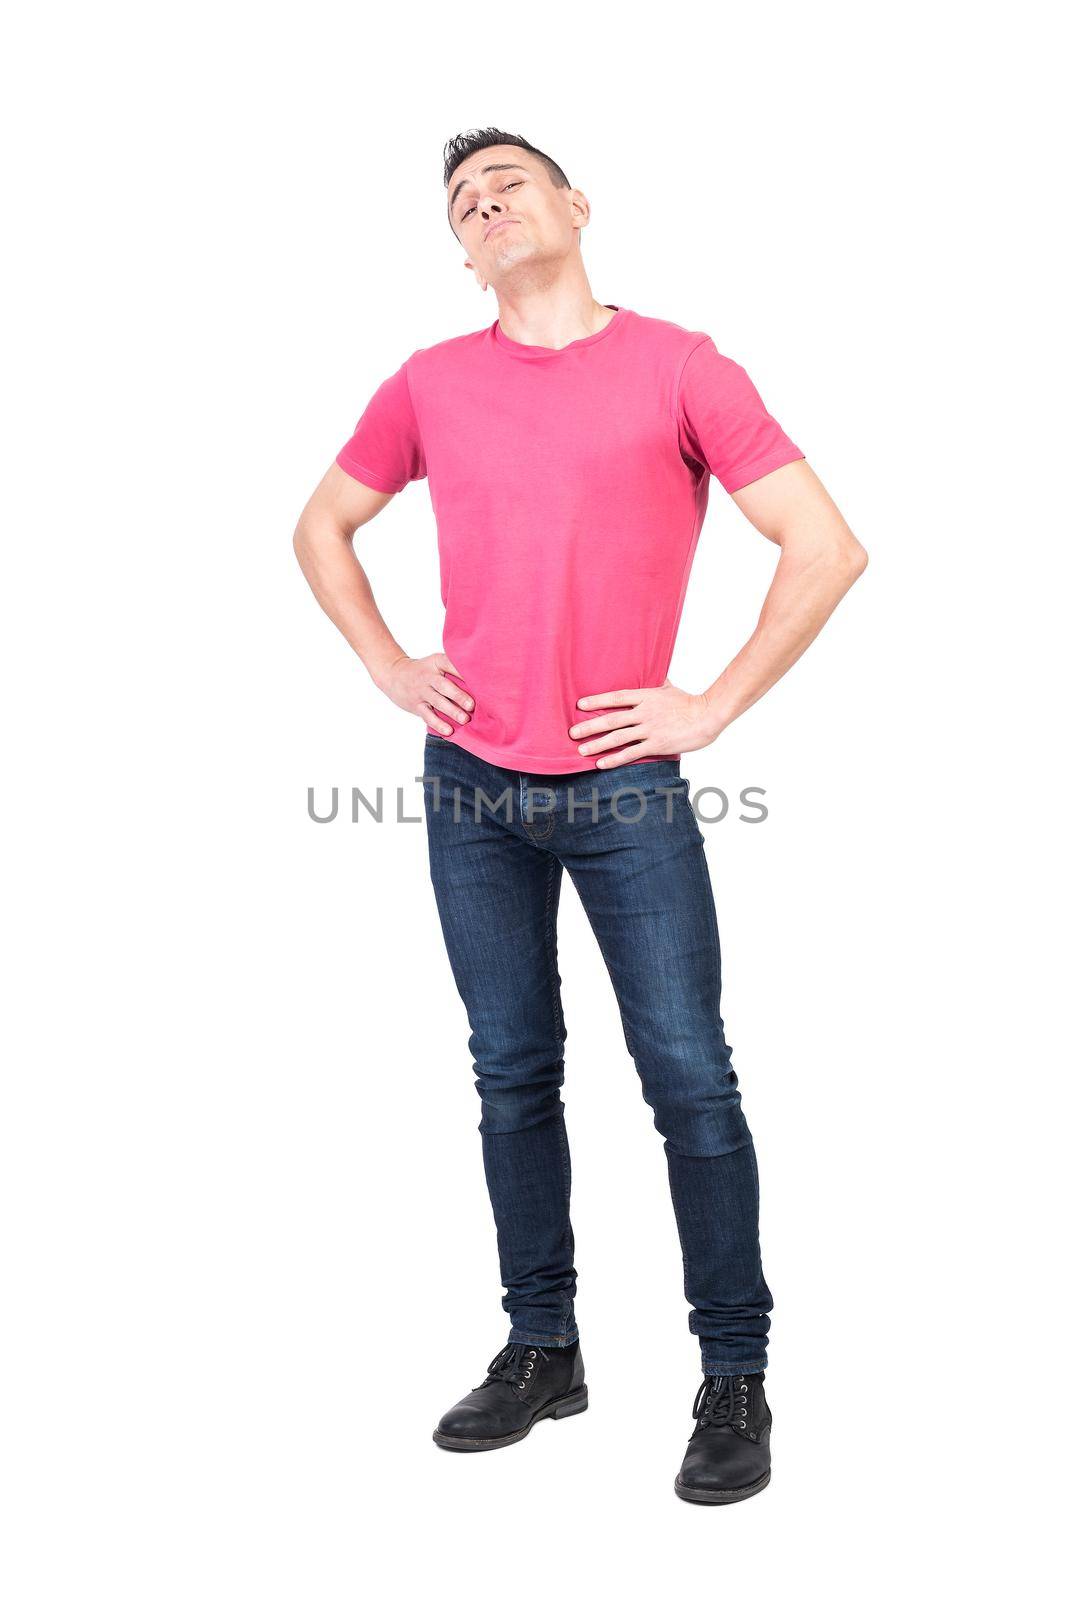 Confident man in jeans and pink t shirt holding hands on waist and looking at camera with proud face expression isolated on white background